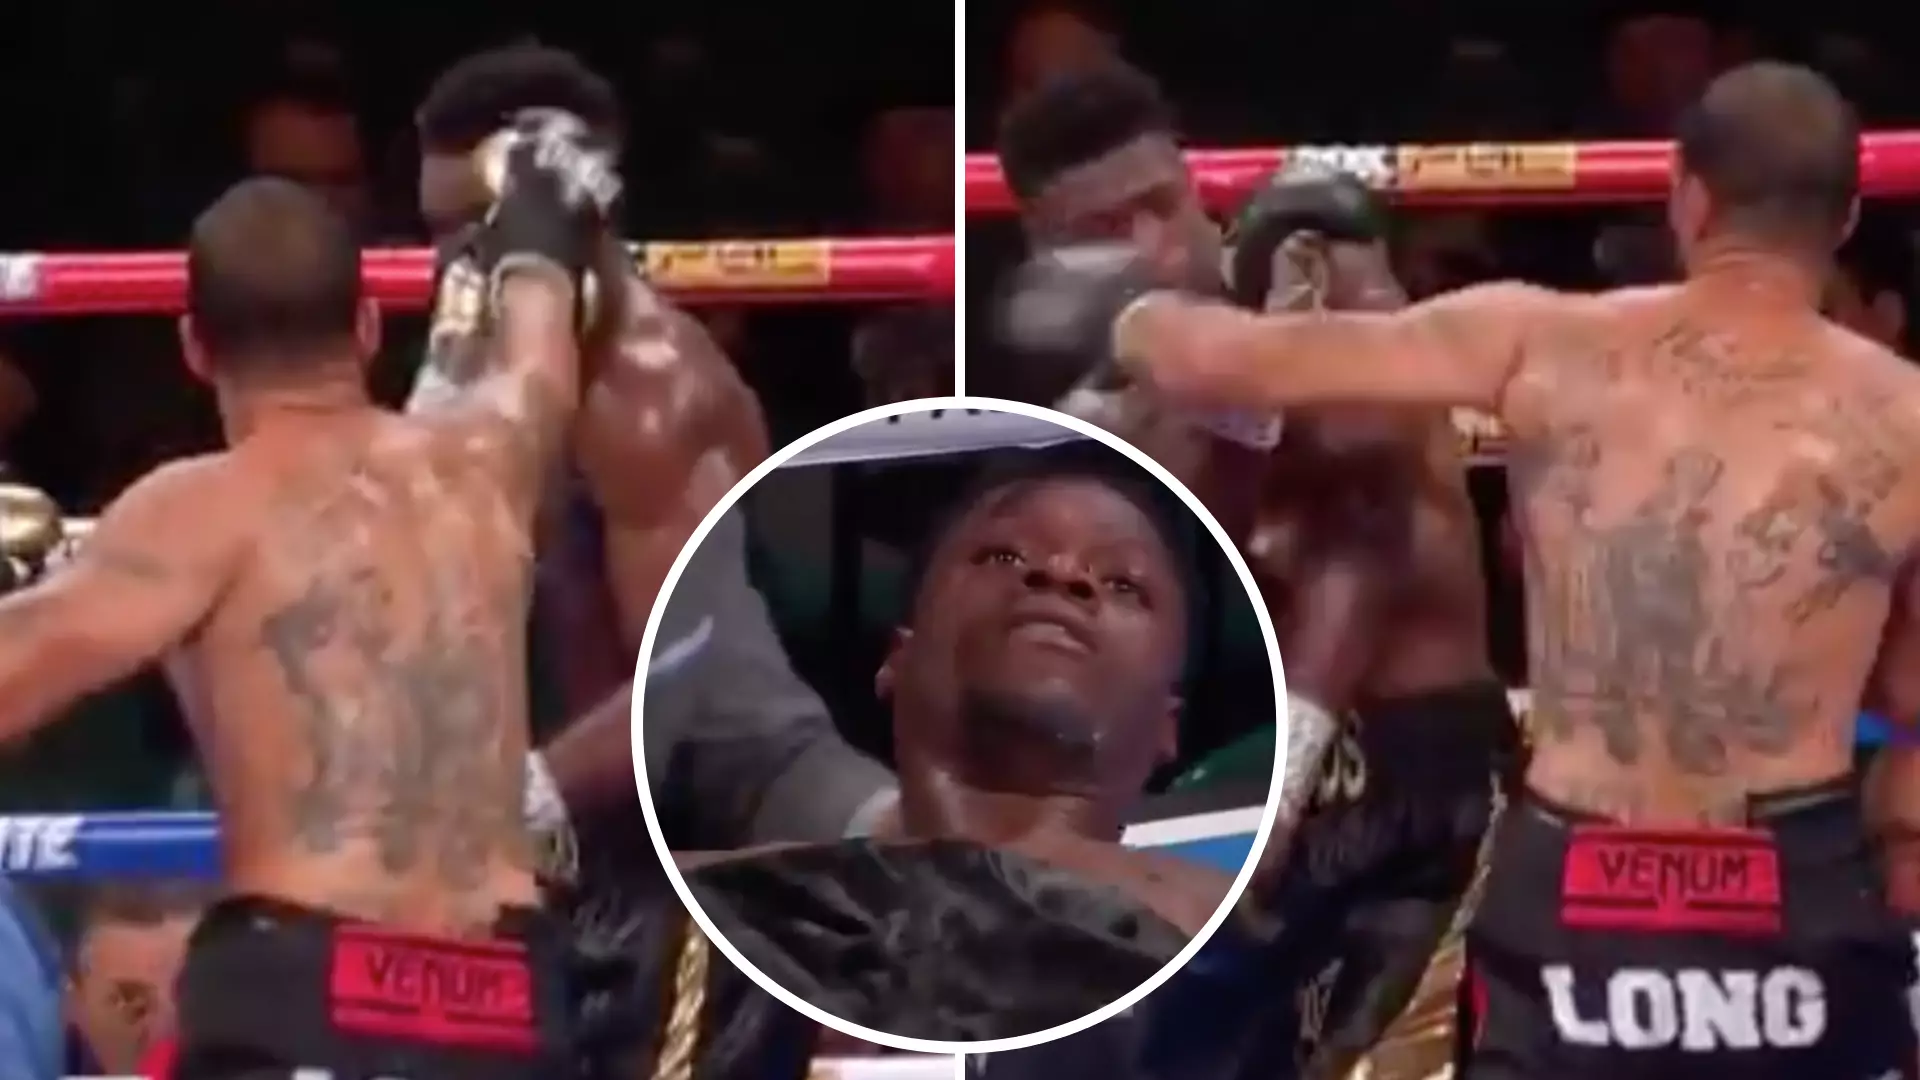 When Deontay Wilder's Brother Suffered A Brutal Knockout On Undercard In Las Vegas